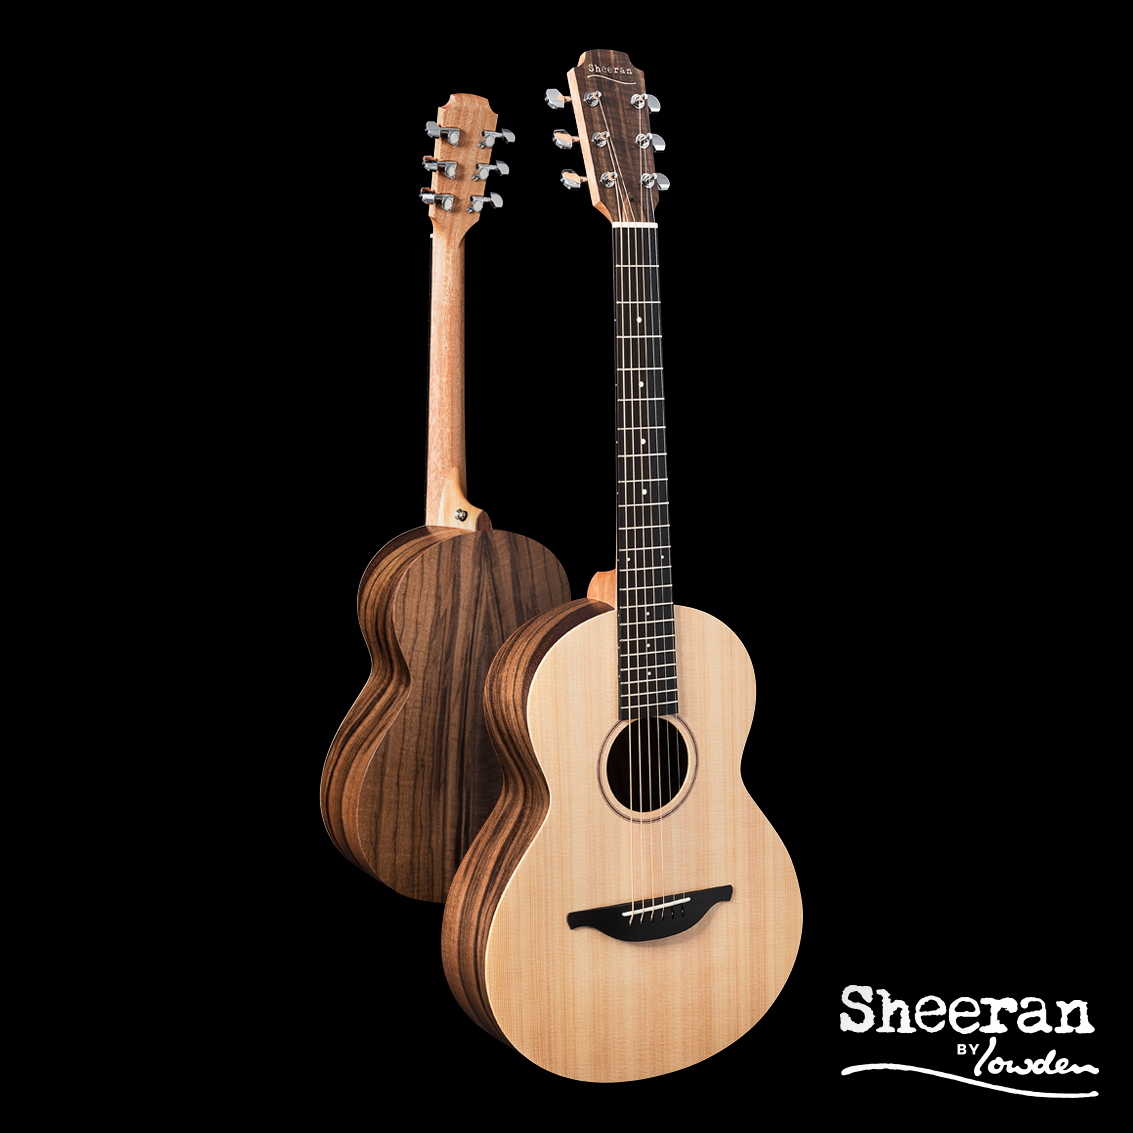 Sheeran by Lowden W01 Solid Cedar Top, Walnut back and sides, No pickup